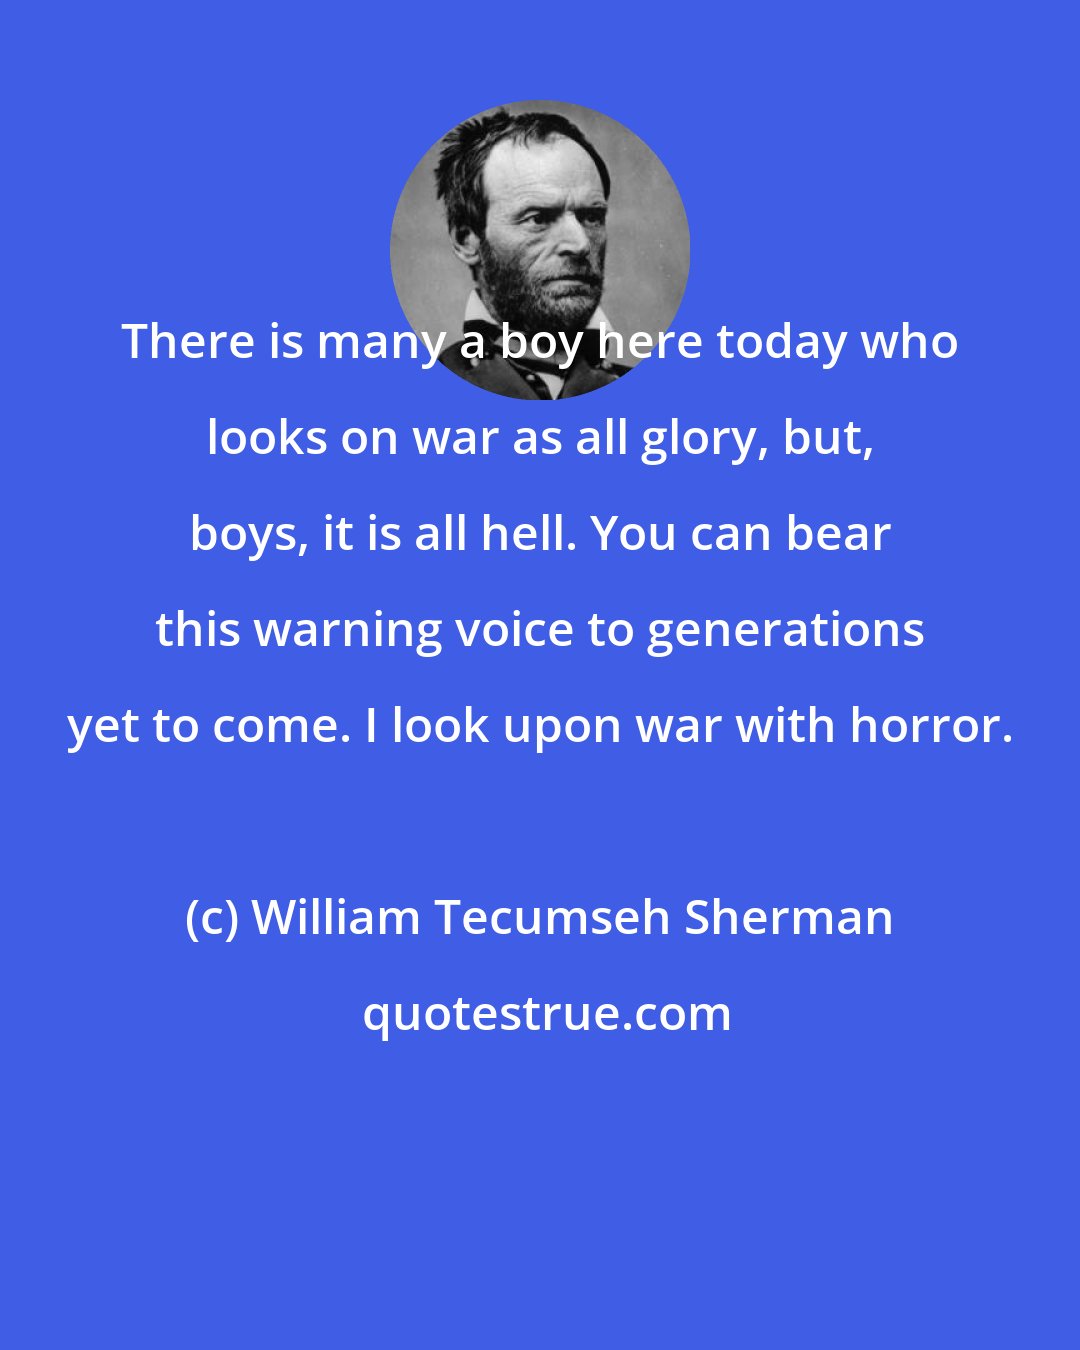 William Tecumseh Sherman: There is many a boy here today who looks on war as all glory, but, boys, it is all hell. You can bear this warning voice to generations yet to come. I look upon war with horror.